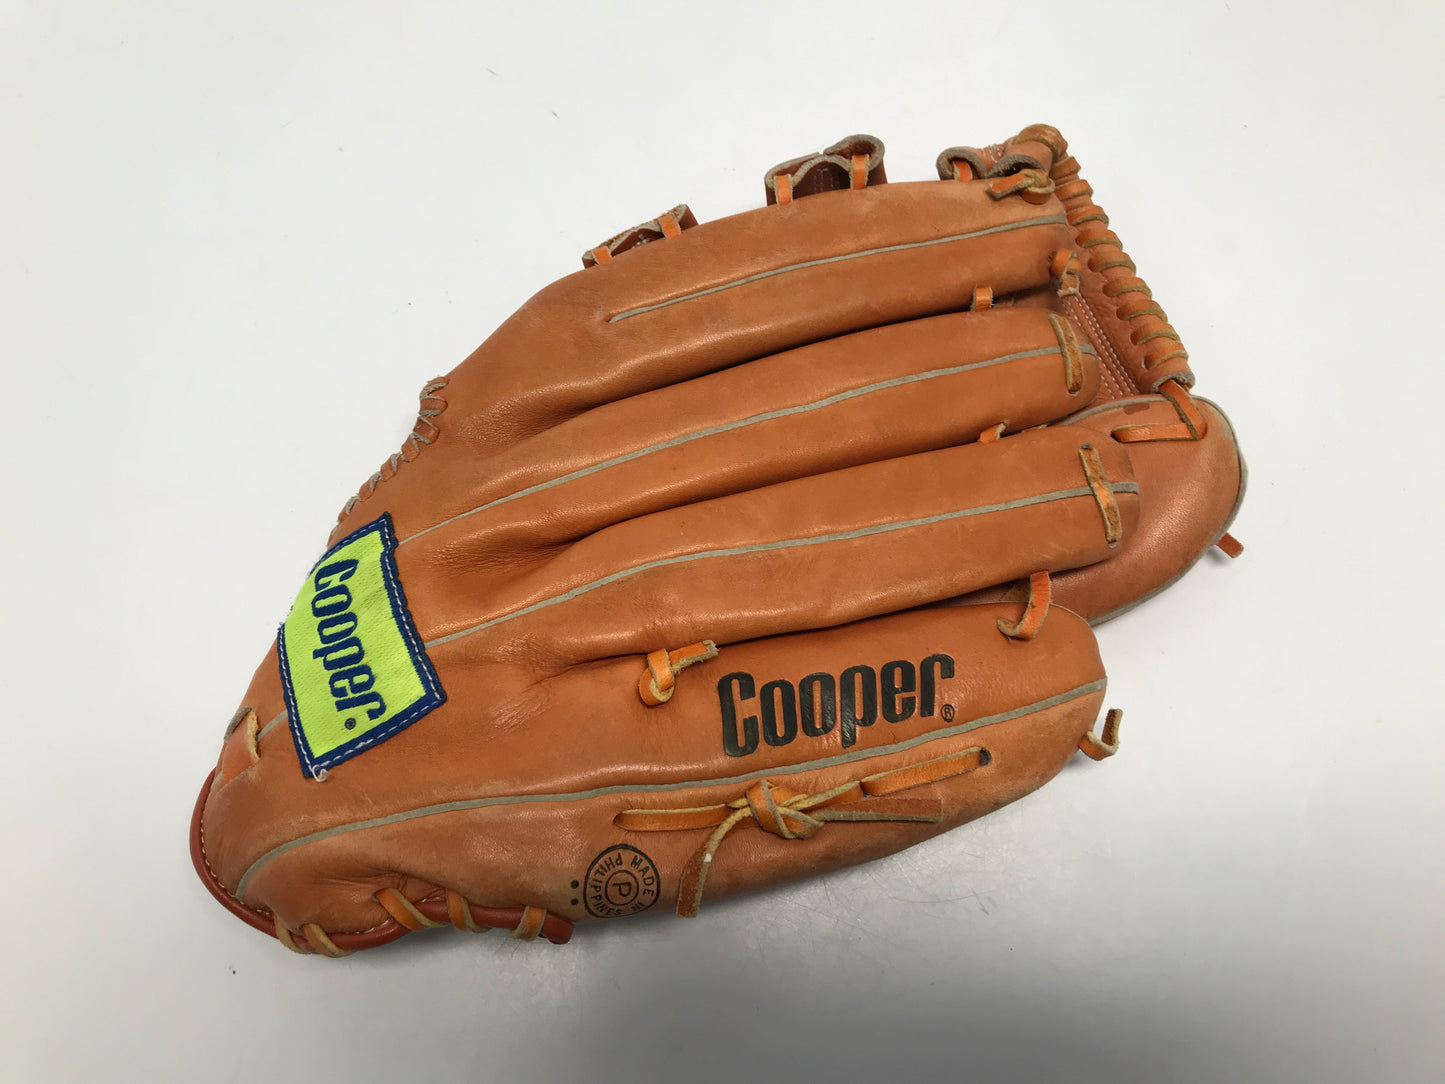 Baseball Glove Adult 13 inch Cooper Leather Black Diamond Baseball Softball Fits on RIGHT hand Excellent